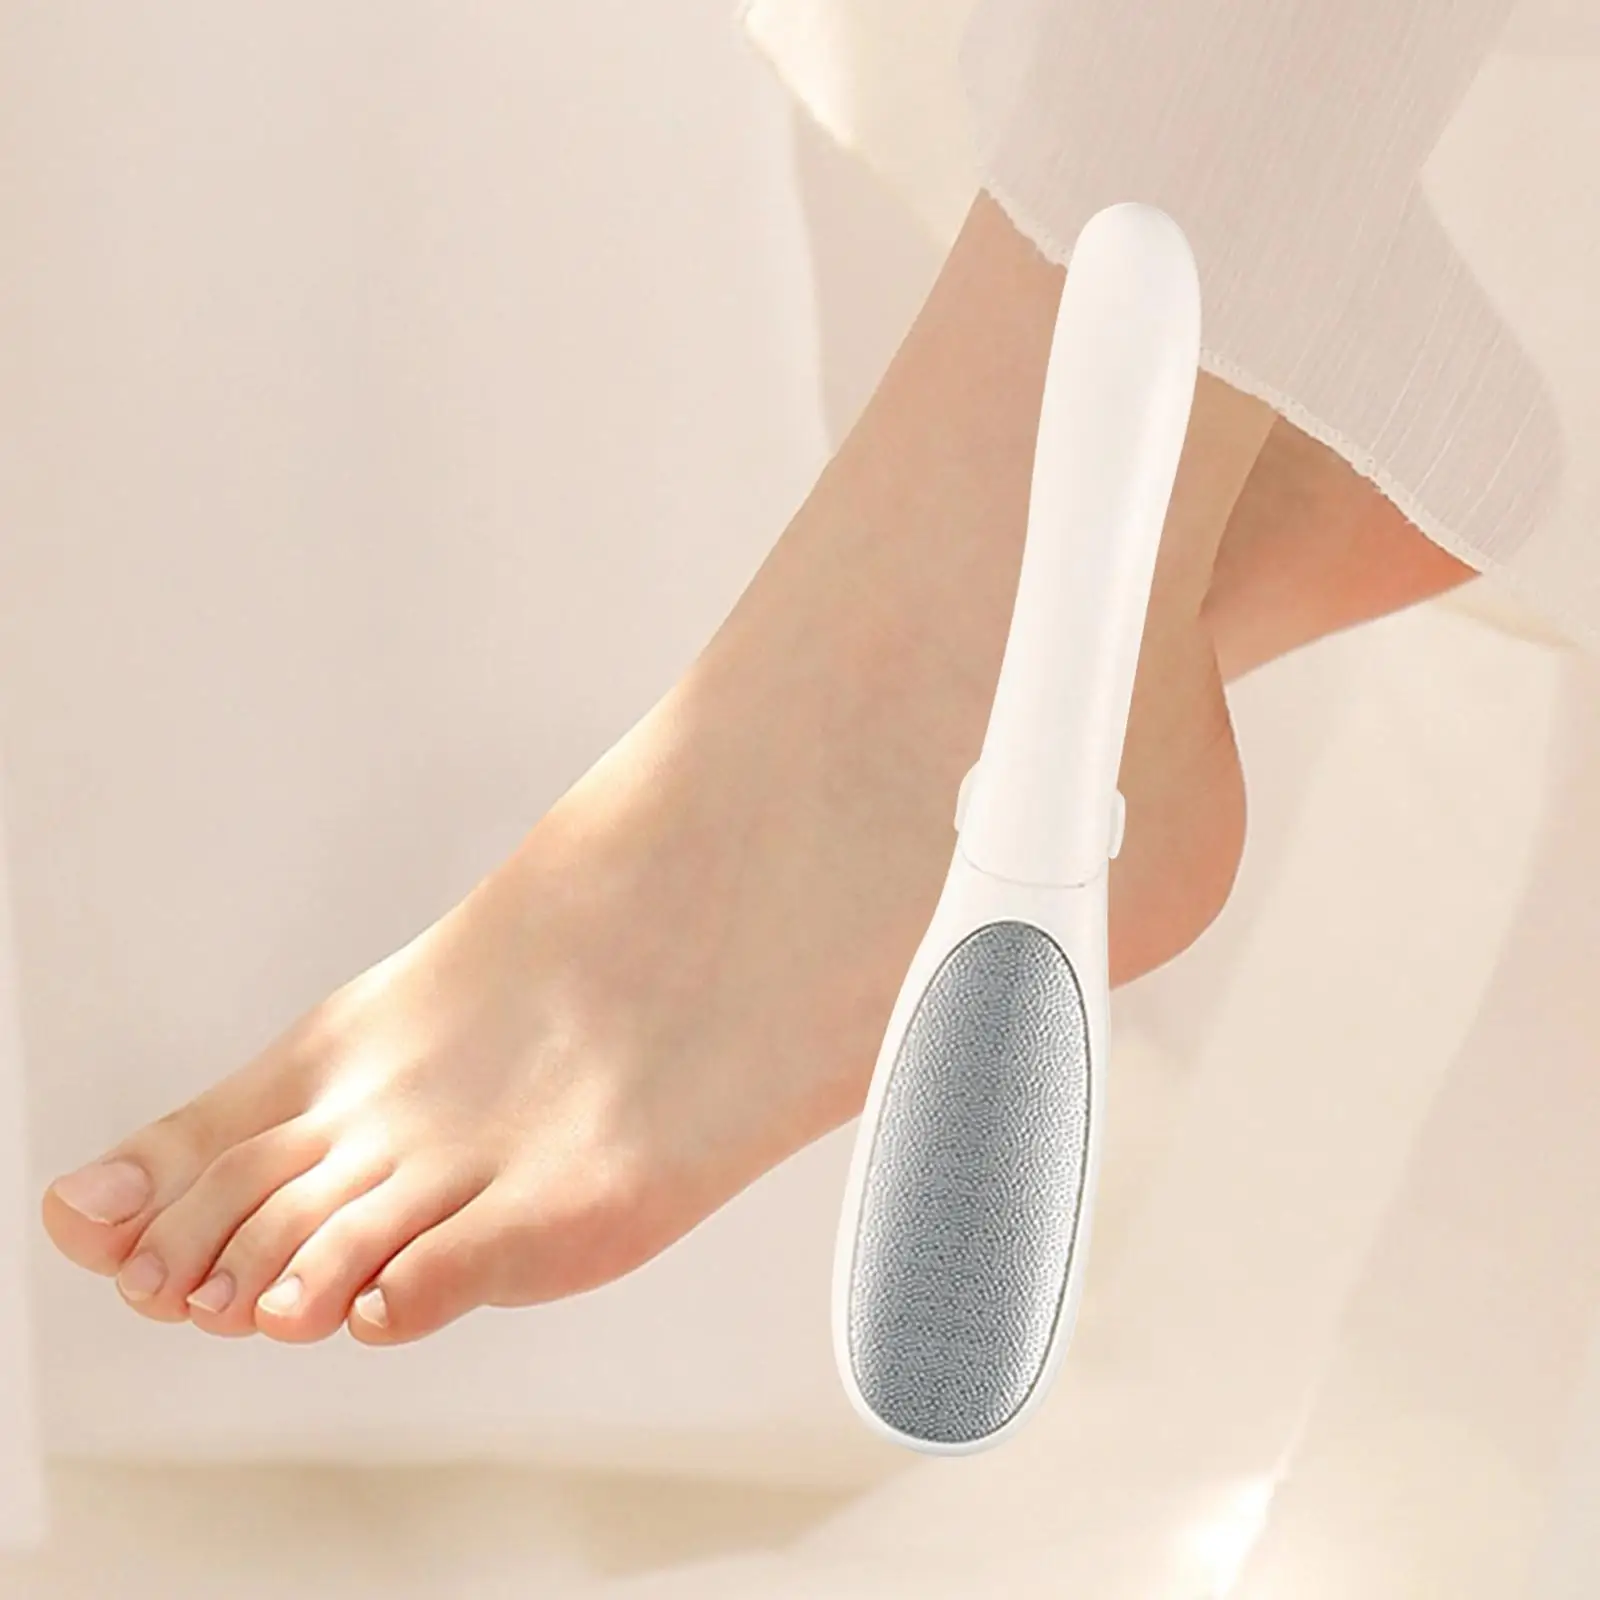 Pedicure Foot File Callus Remover Effortlessly Stainless Steel File 2 in 1 Design Pedicure Tool for Salon Personal Massaging SPA